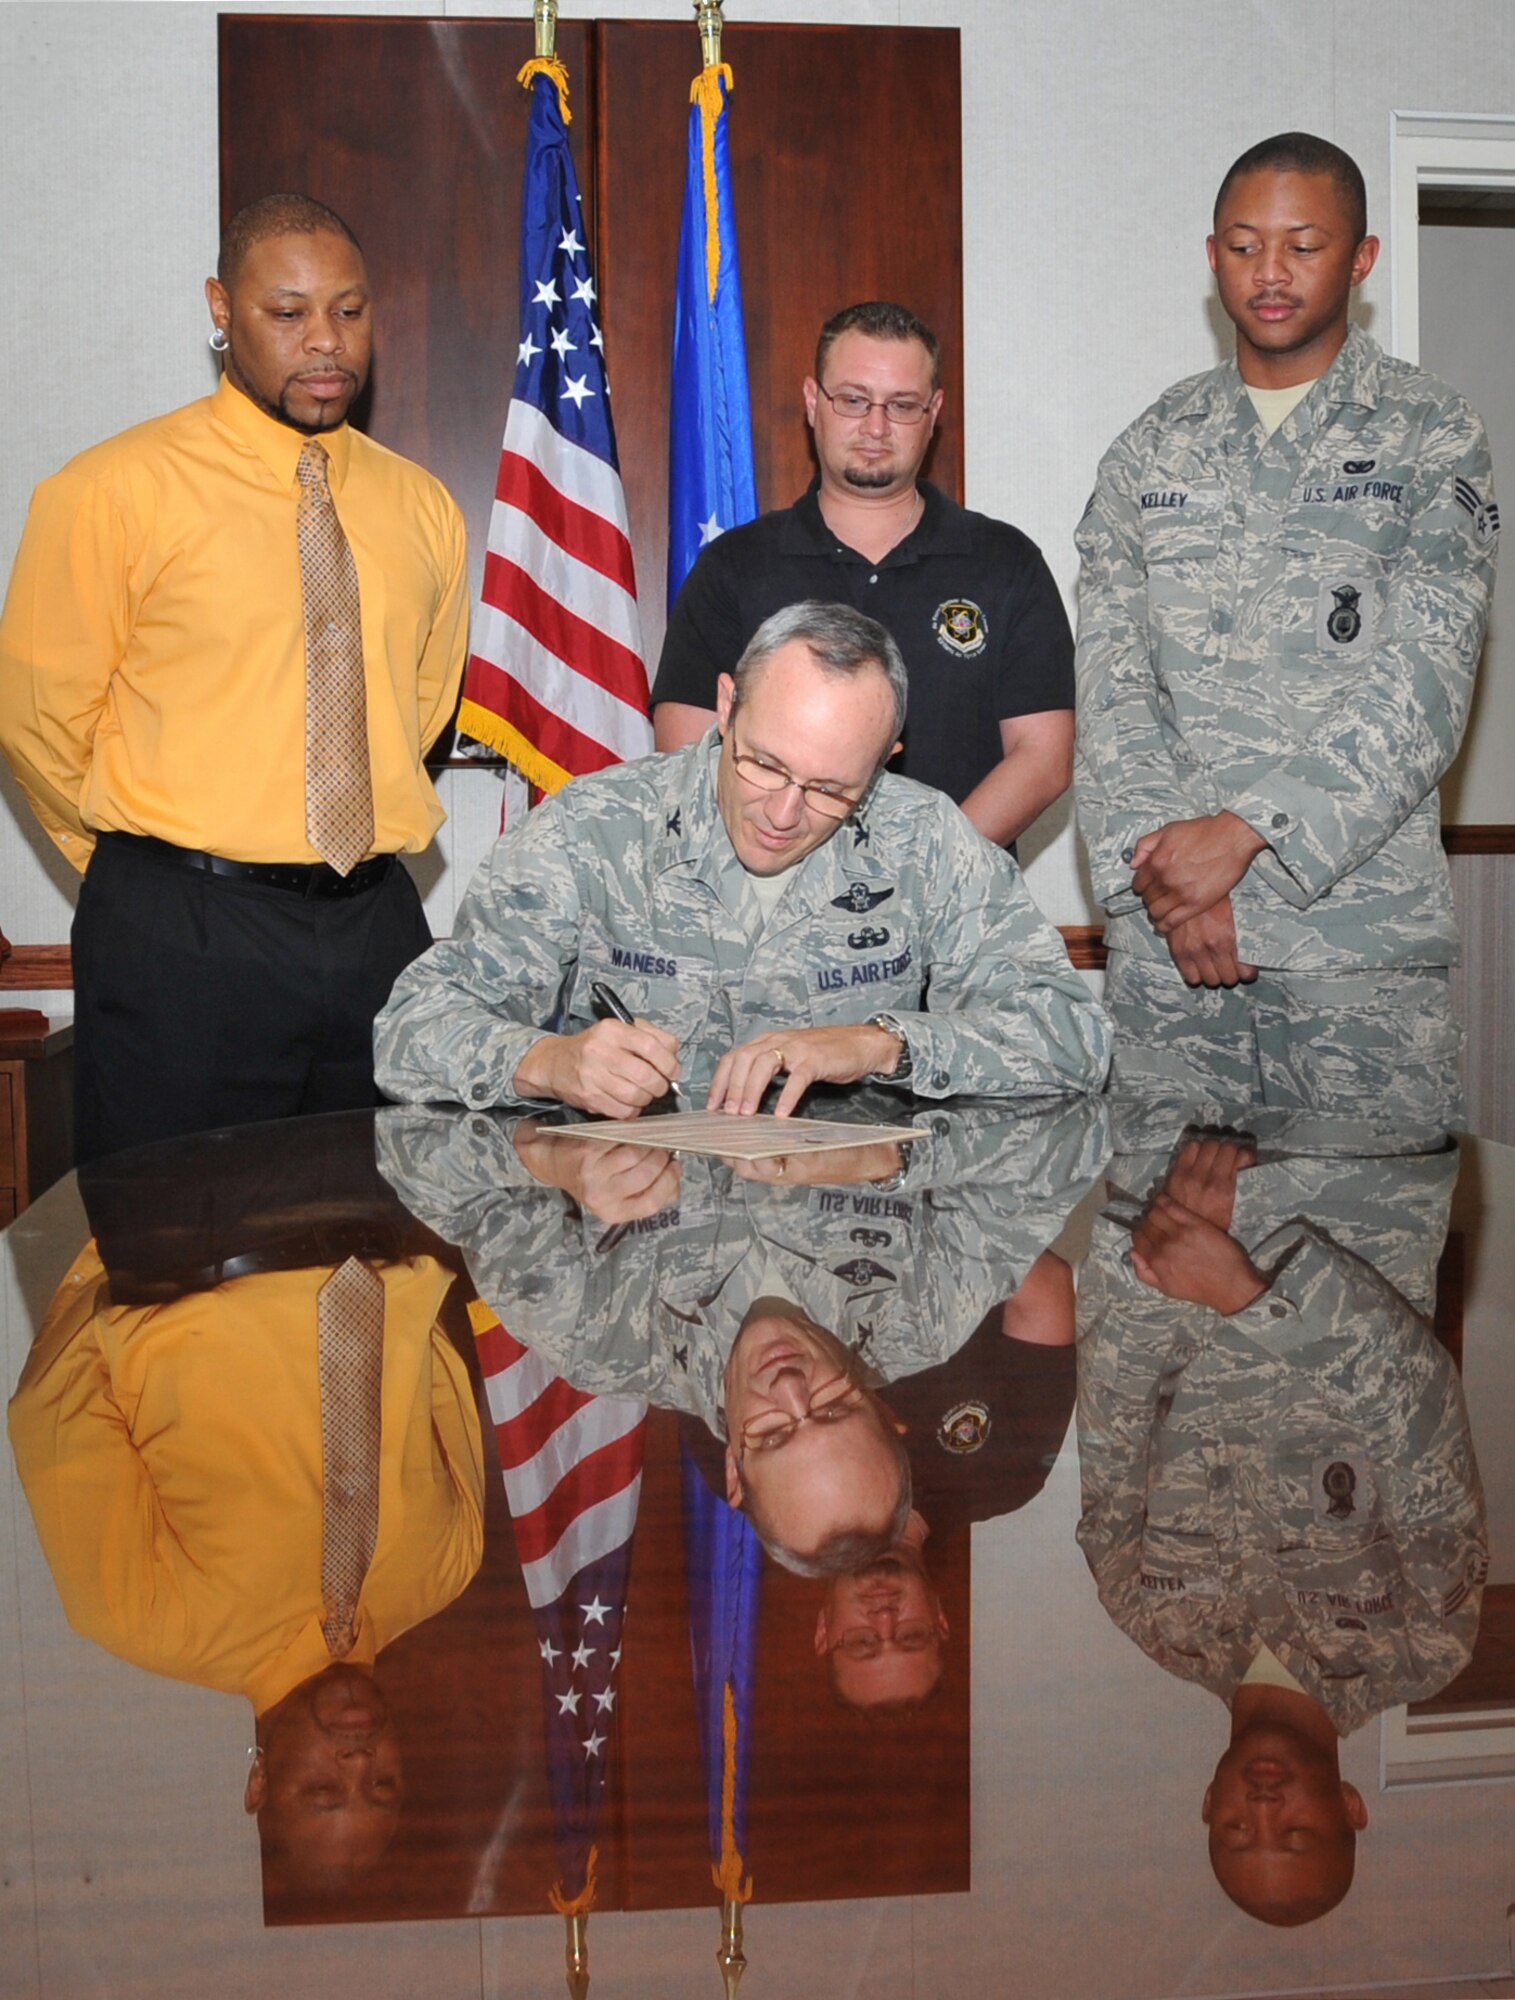 Col. Robert L. Maness, 377th Air Base Wing commander, signs a proclamation making October 2010 Wounded Warrior month at Kirtland Air Force Base. Observing are three wounded warriors. From left,  Albert Frisbey, 377th Logistics Readiness Squadron, Charles Wyatt, Air Force Nuclear Weapons Center, and Senior Airman Eddy Kelley, 377th Security Forces Squadron.  U.S. Air Force Photo by Elizabeth Martinez.